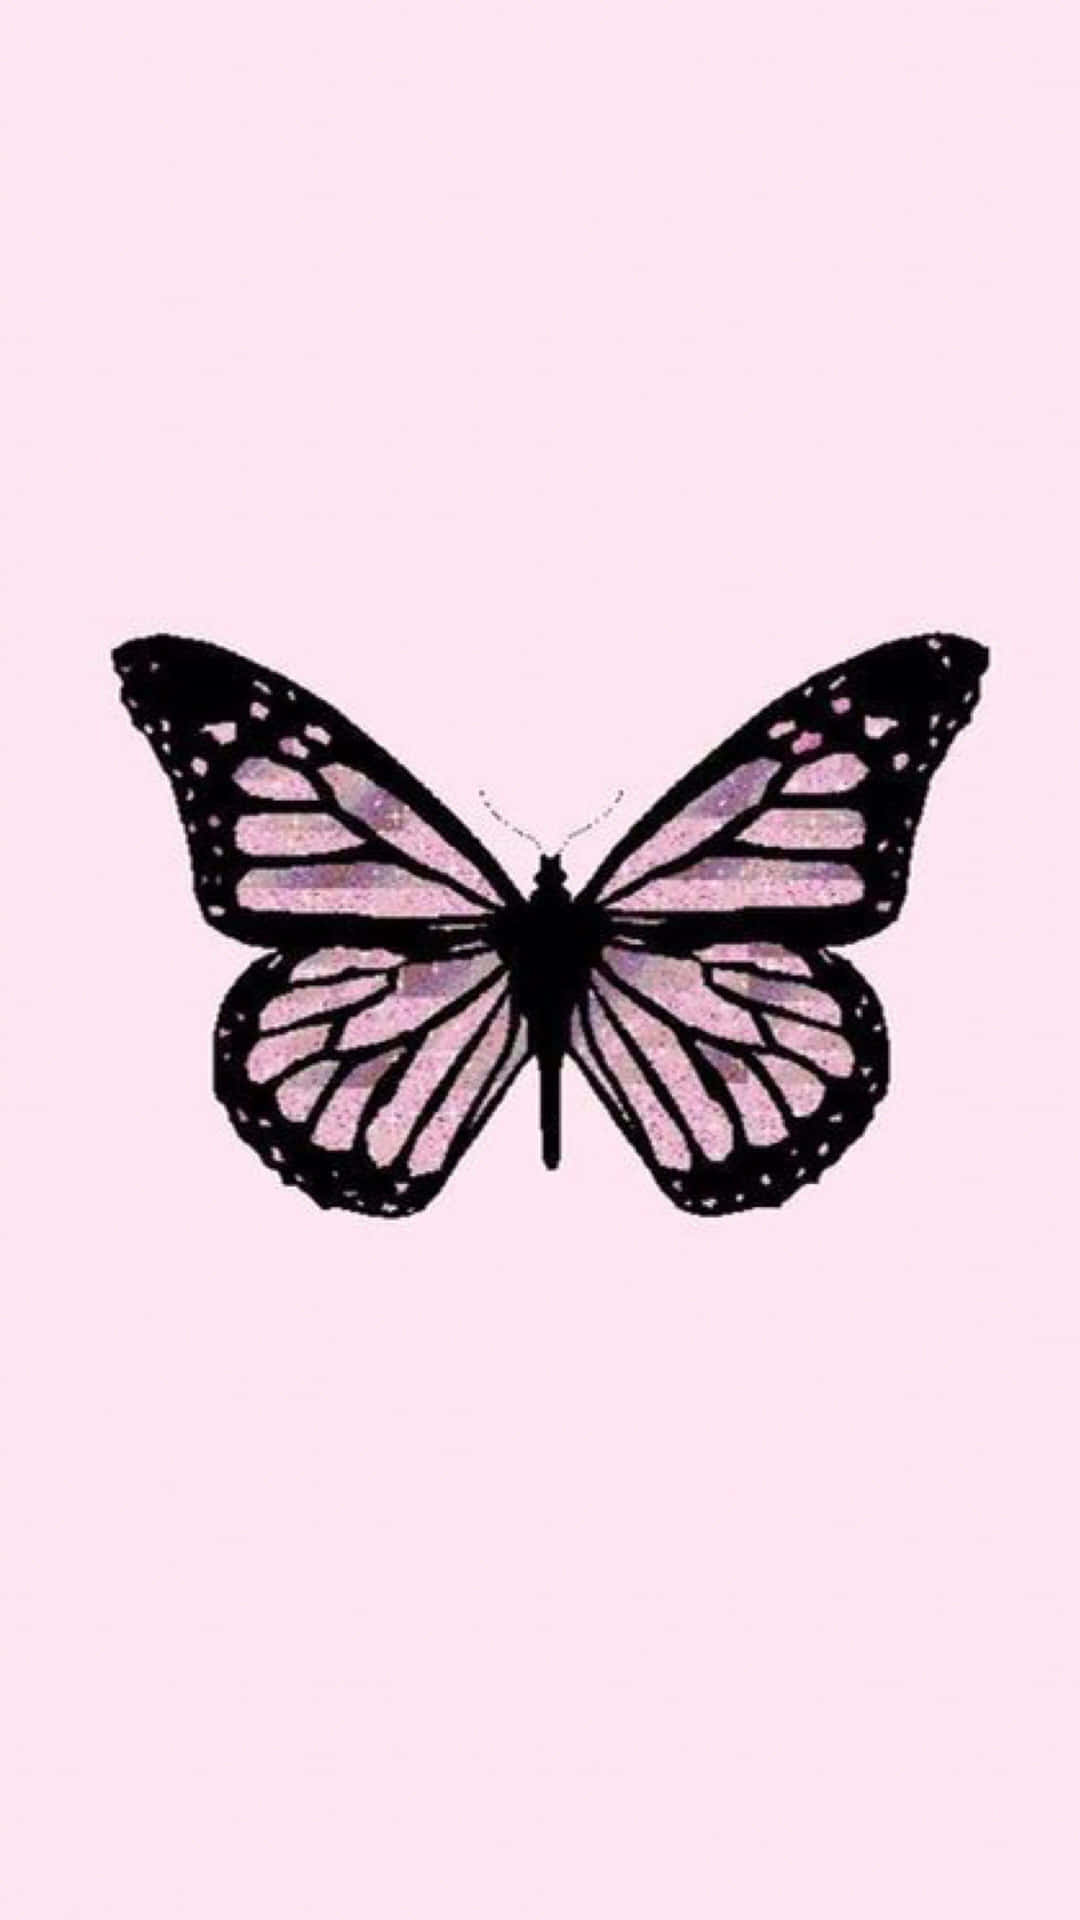 A Butterfly On A Pink Background Wallpaper